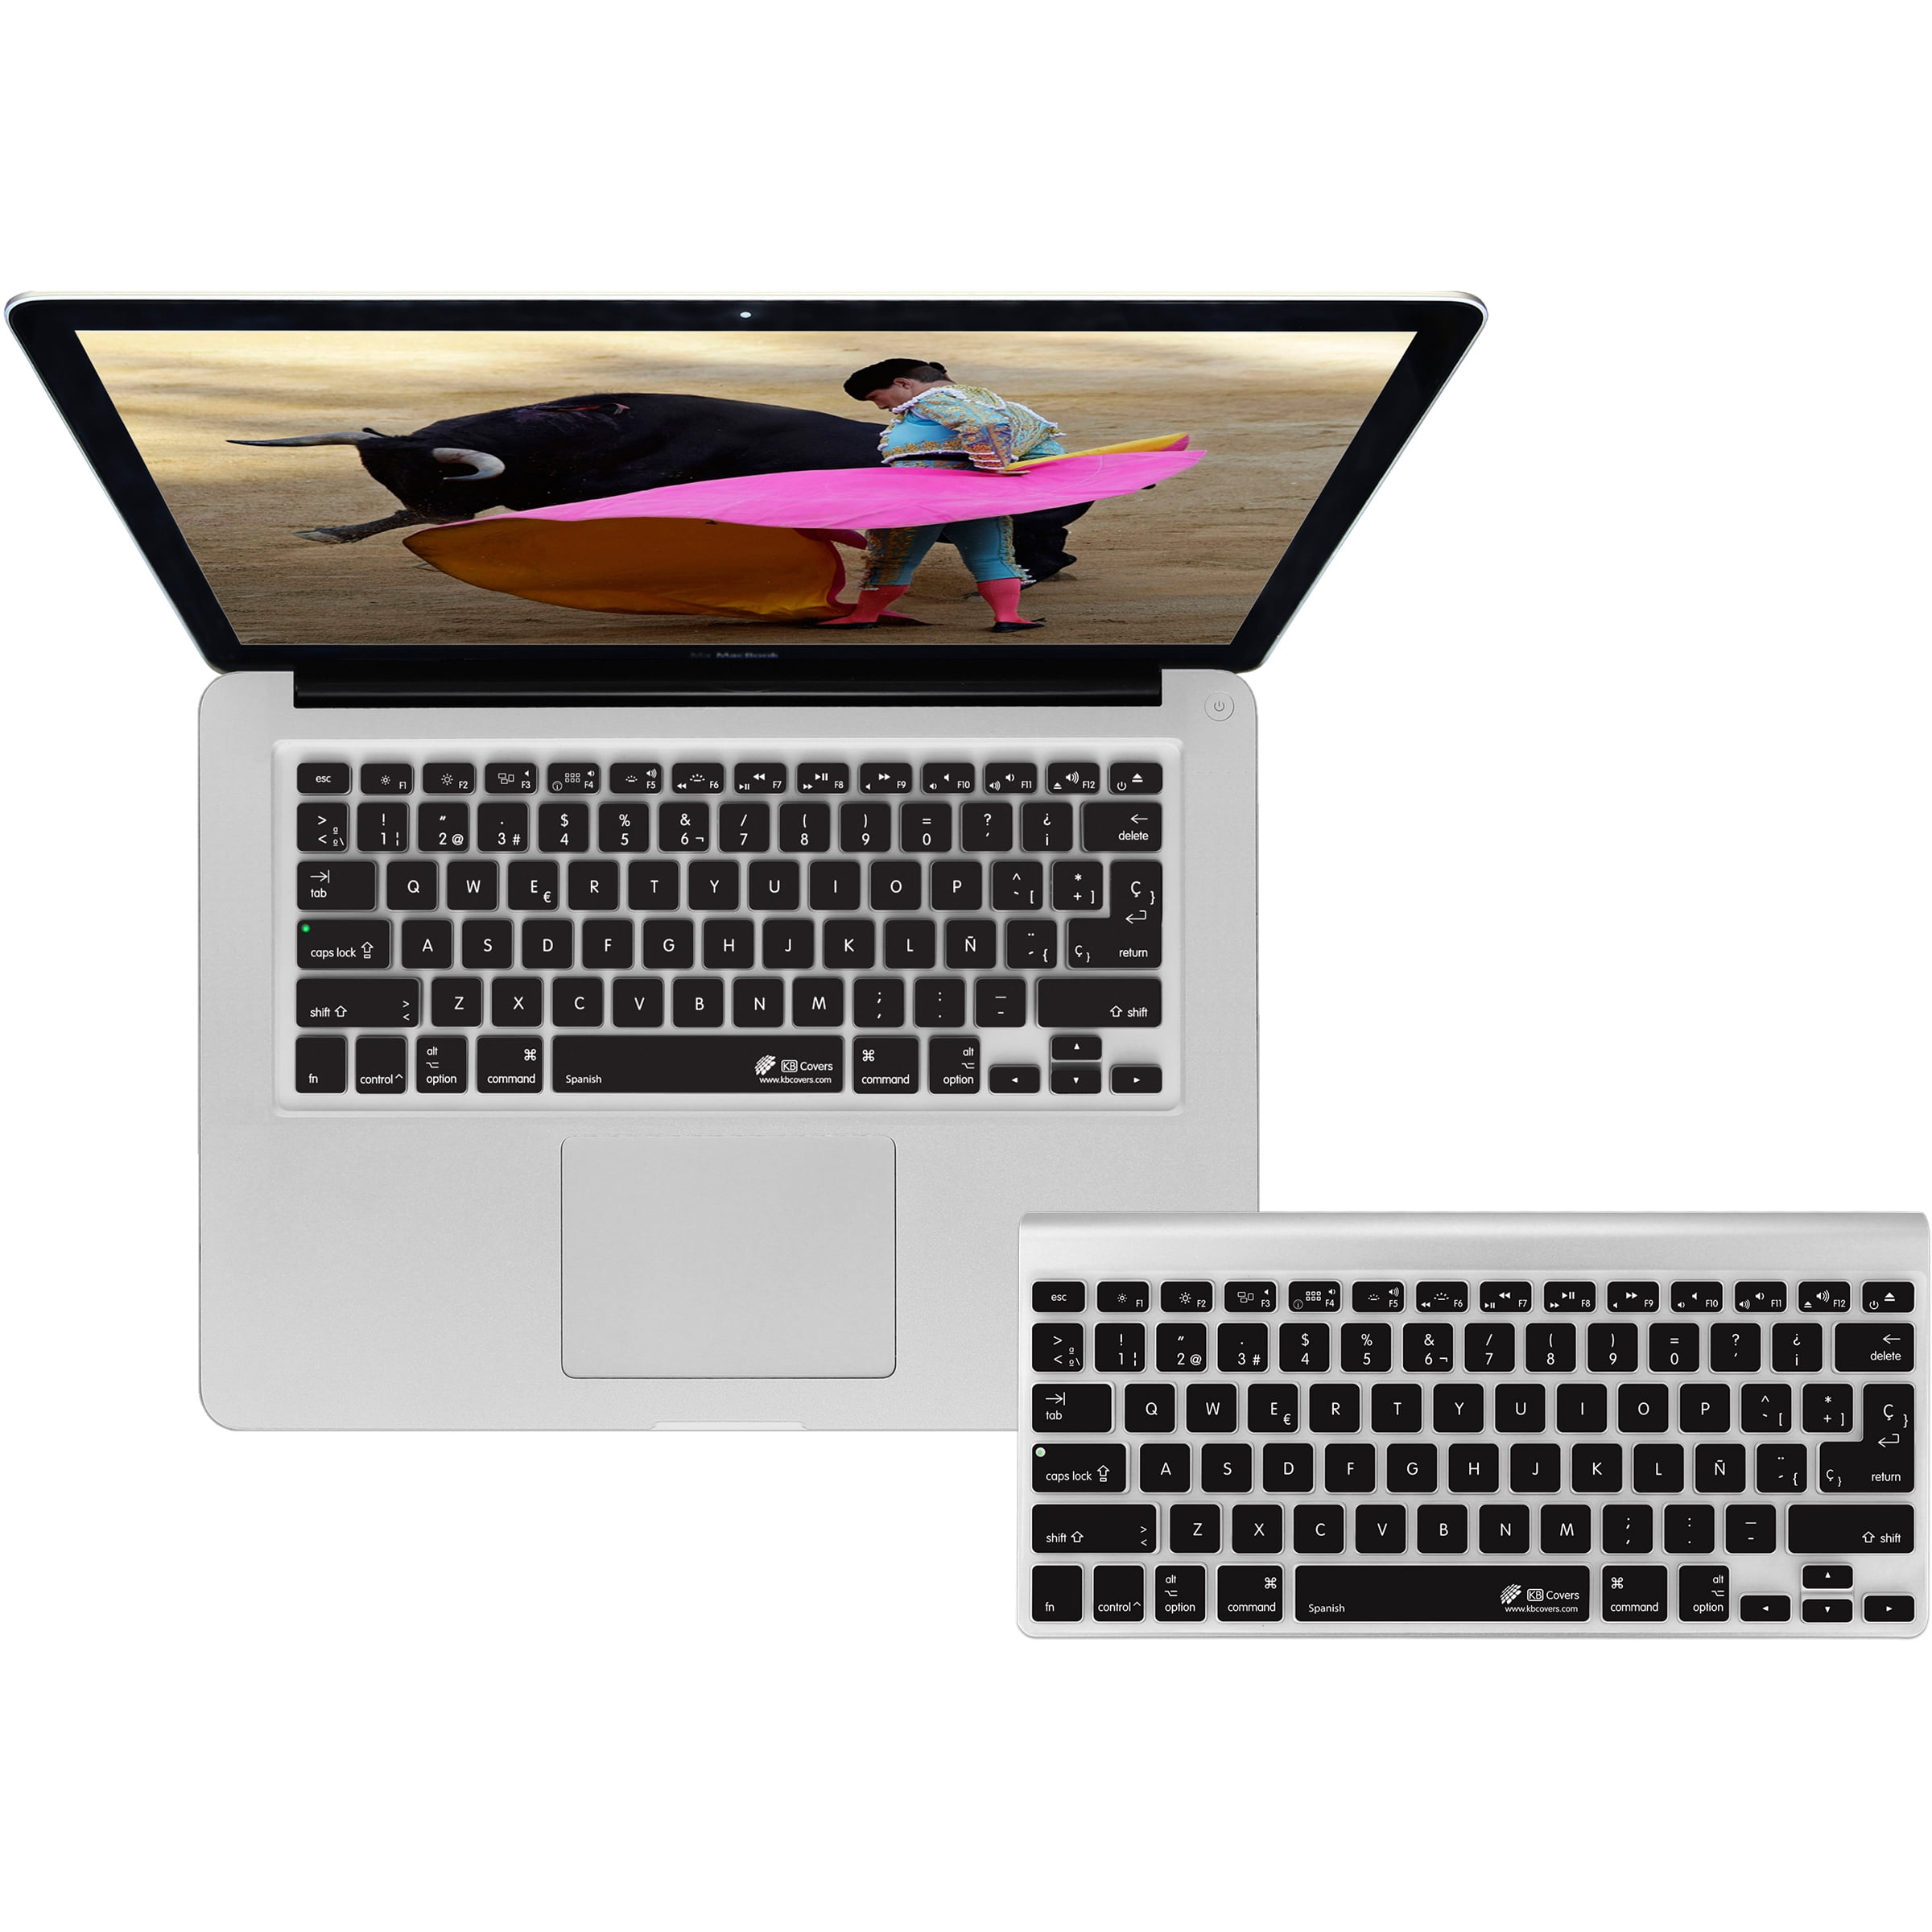 2020 Spanish Keyboard Protective Film for Mac Book Pro 13 A2159 Pro13 Air A1466 A1708A1989A1932 EU Key Silicone Keyboard Cover-Pro13 15 Touchbar 